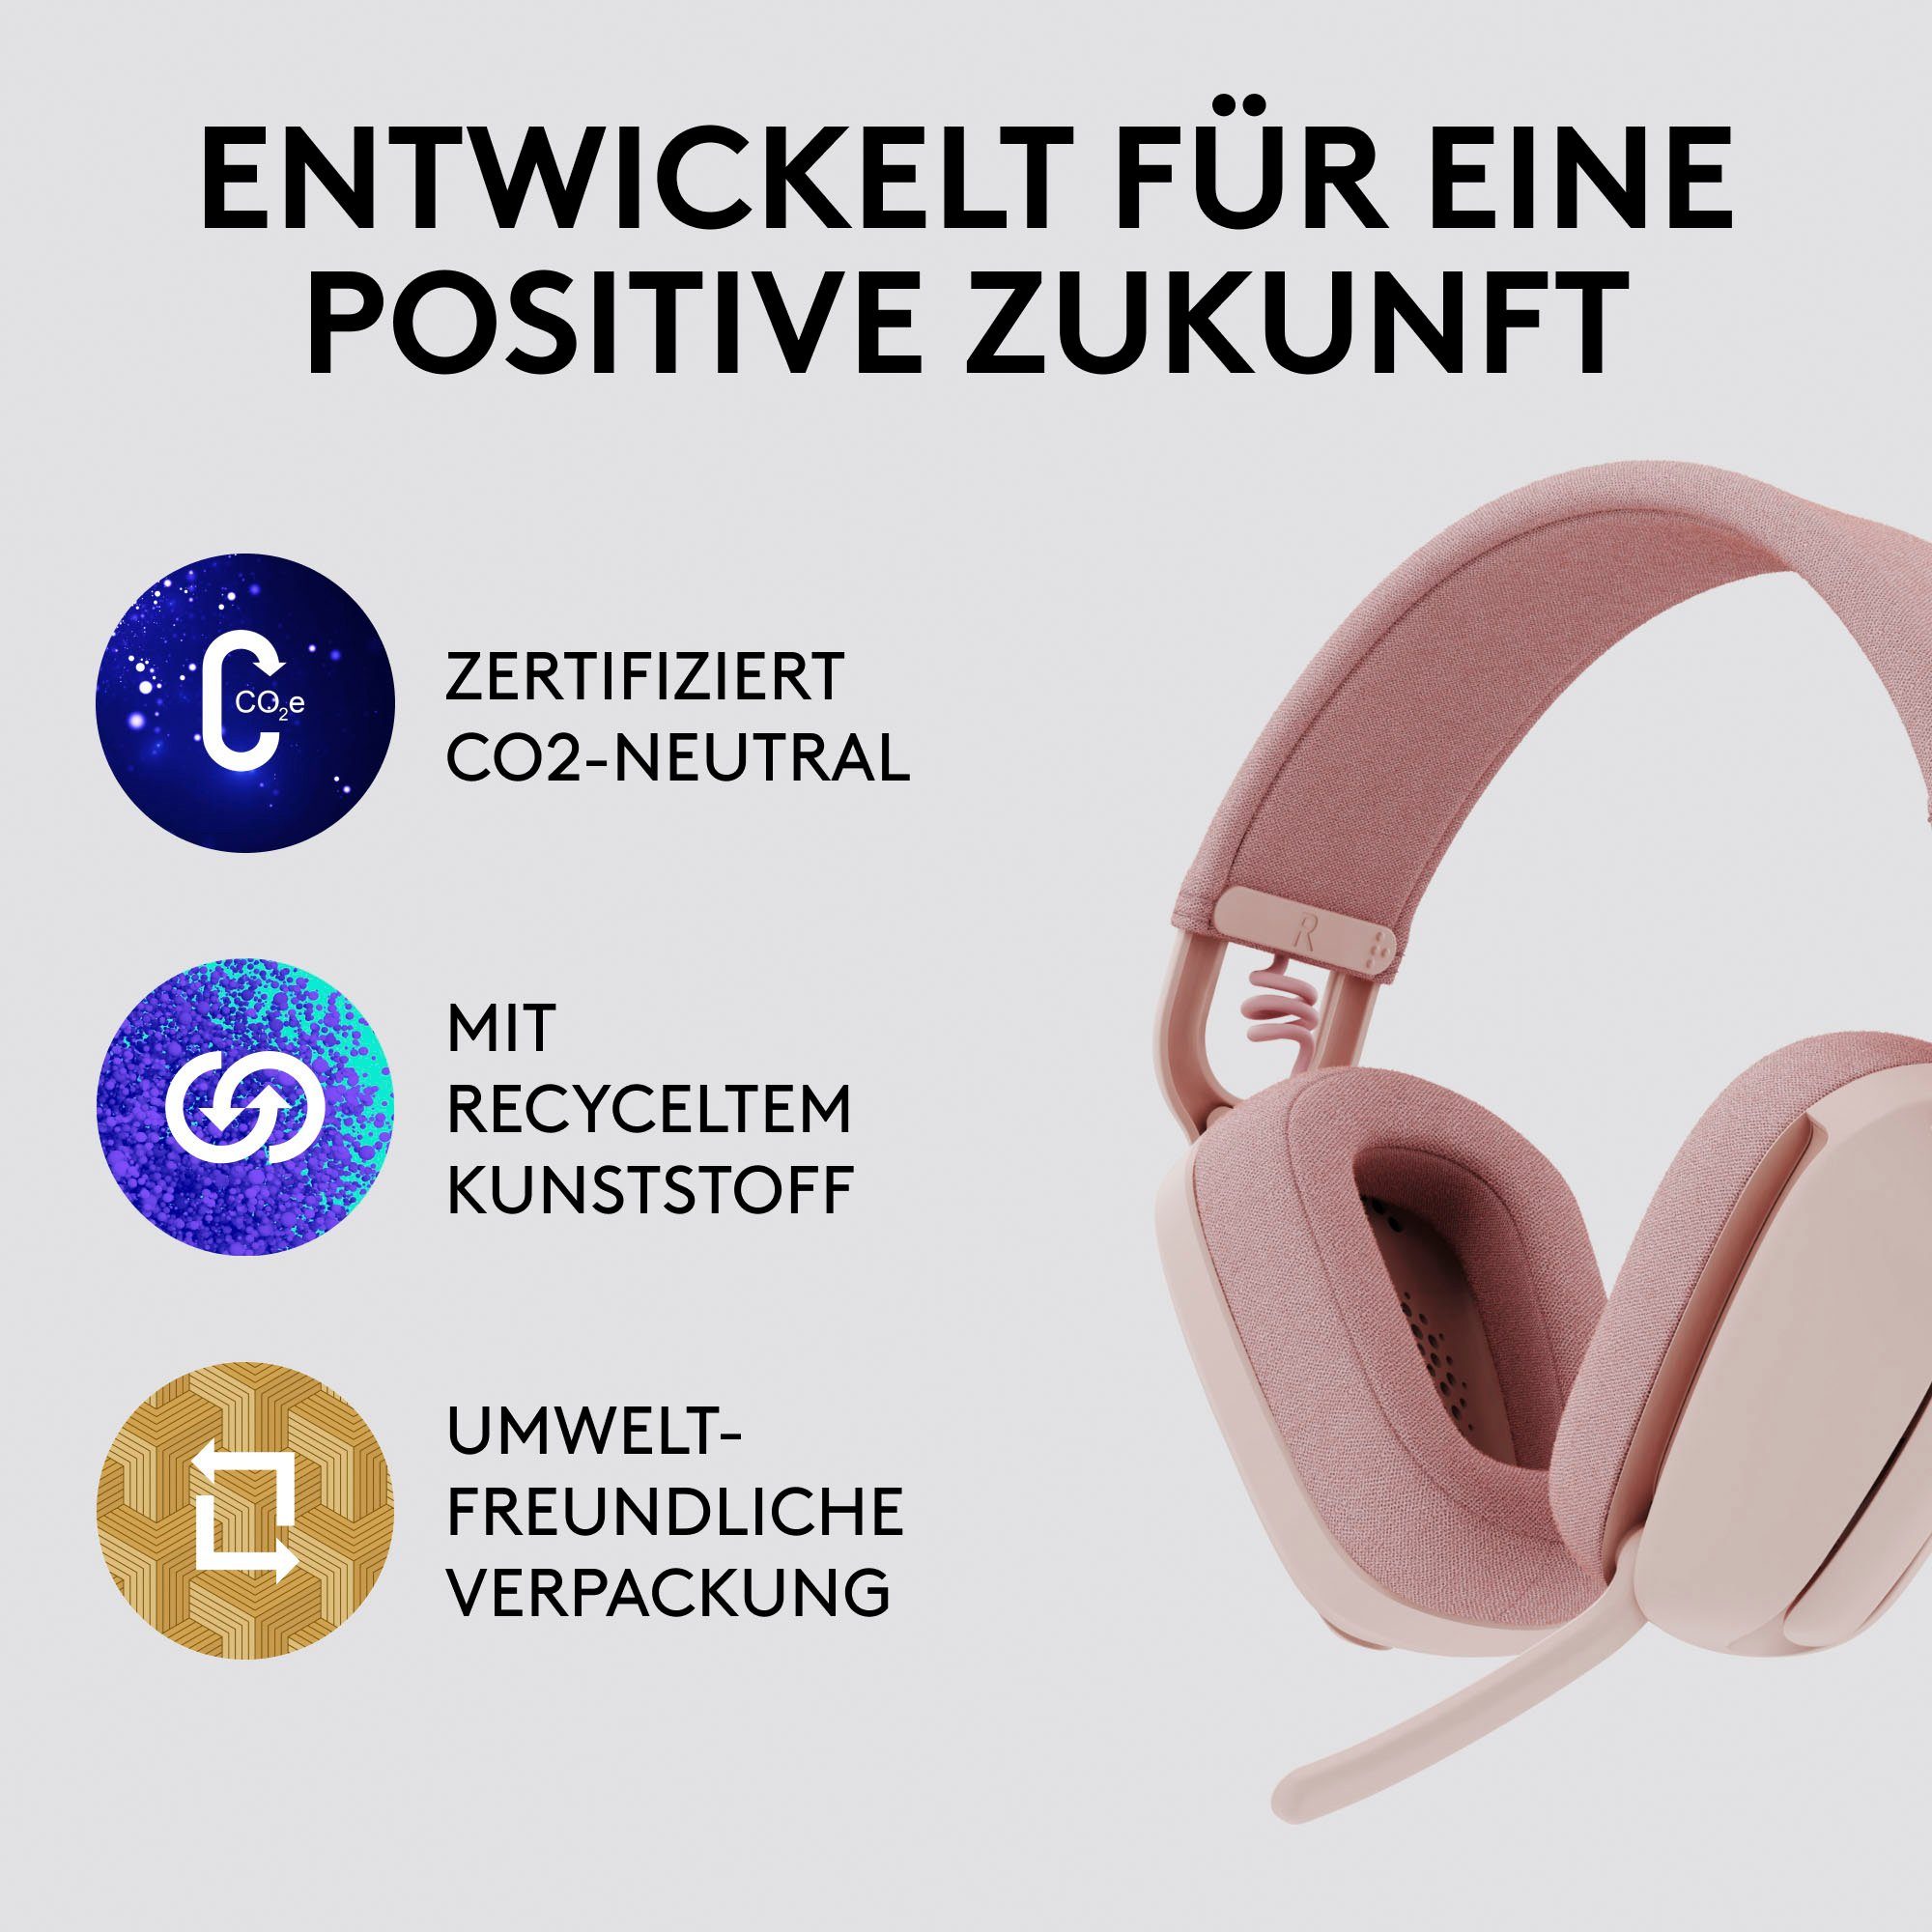 Vibe rose 100 Bluetooth) Logitech (Noise-Cancelling, Zone Gaming-Headset